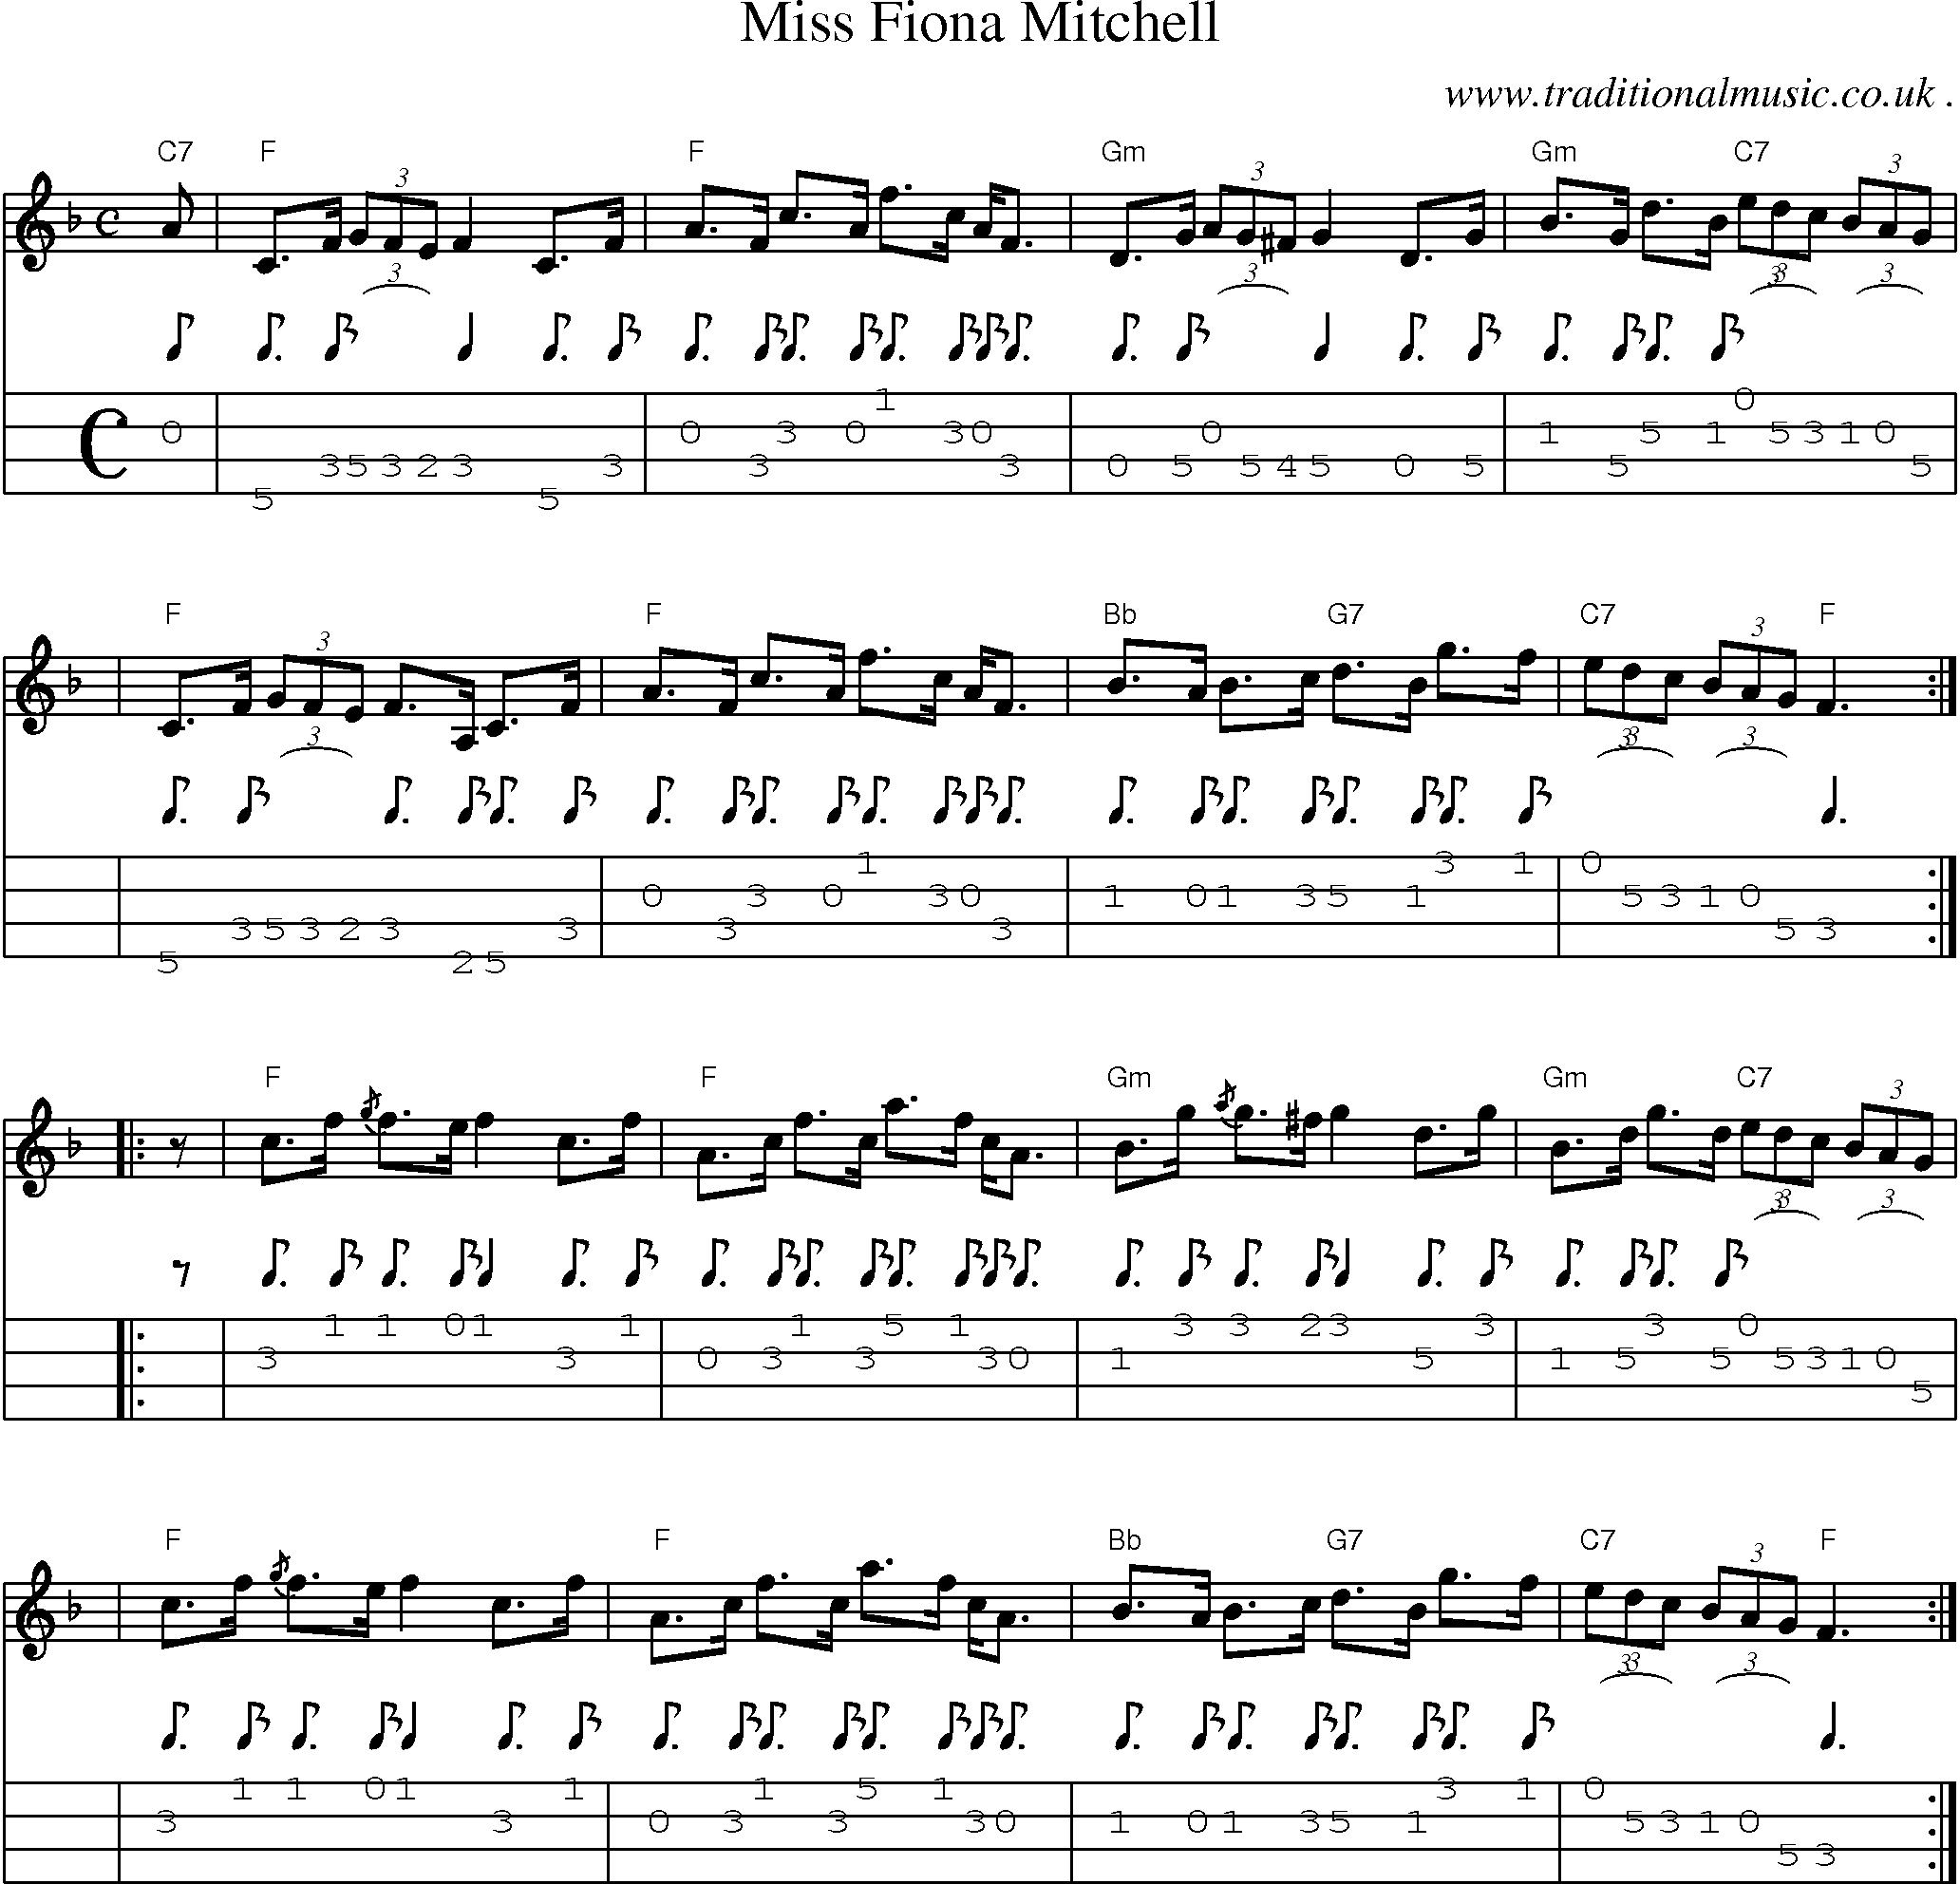 Sheet-music  score, Chords and Mandolin Tabs for Miss Fiona Mitchell